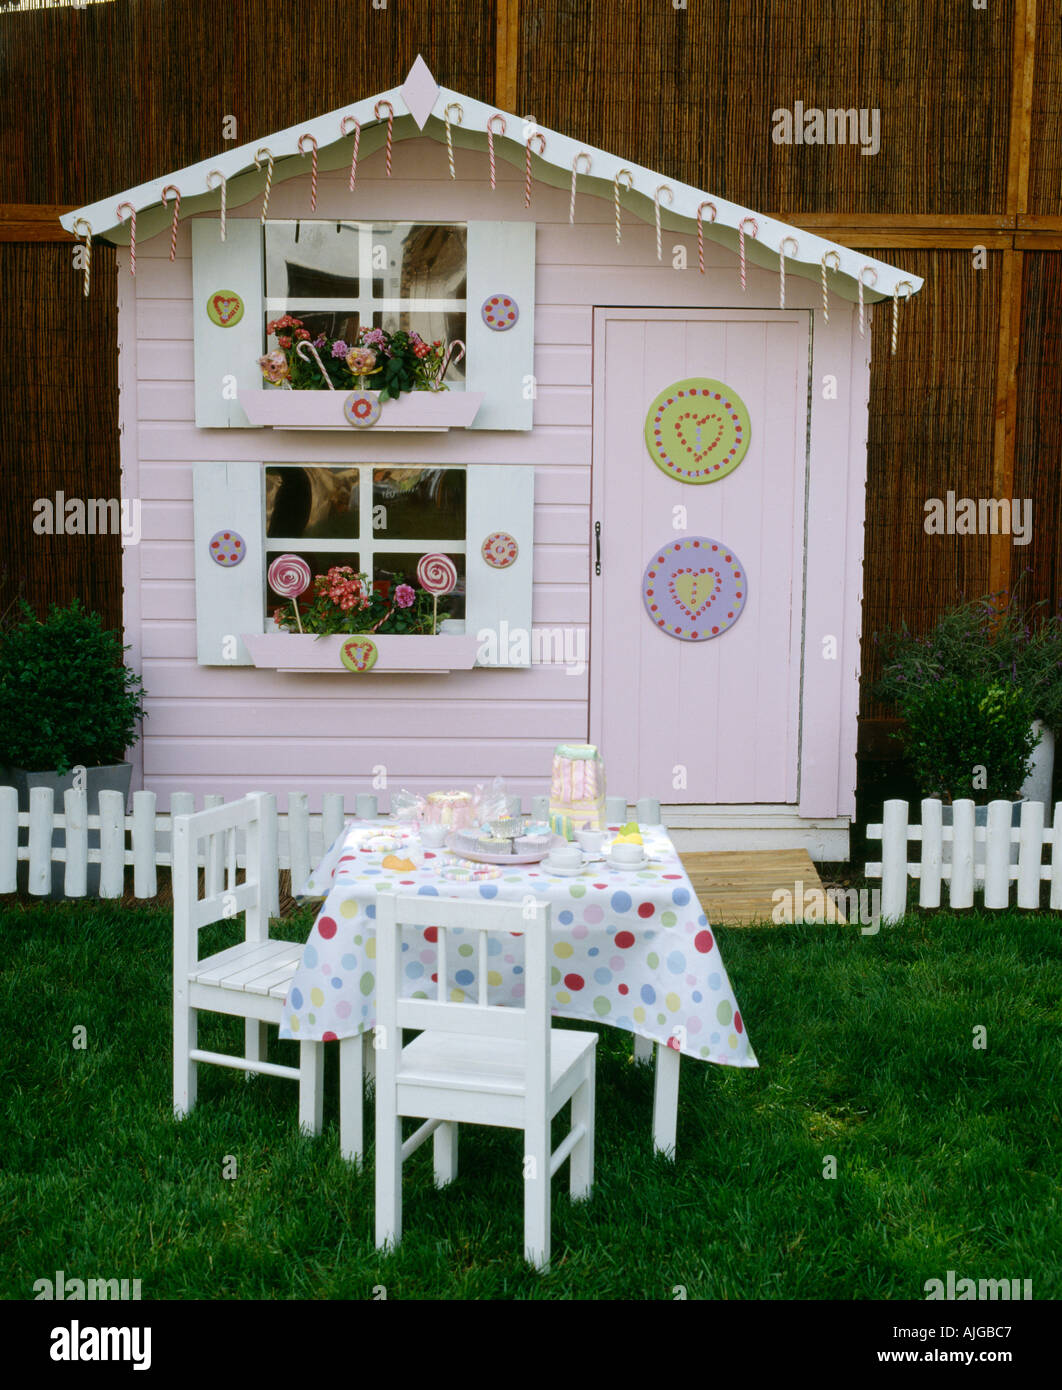 children's tea party table and chairs